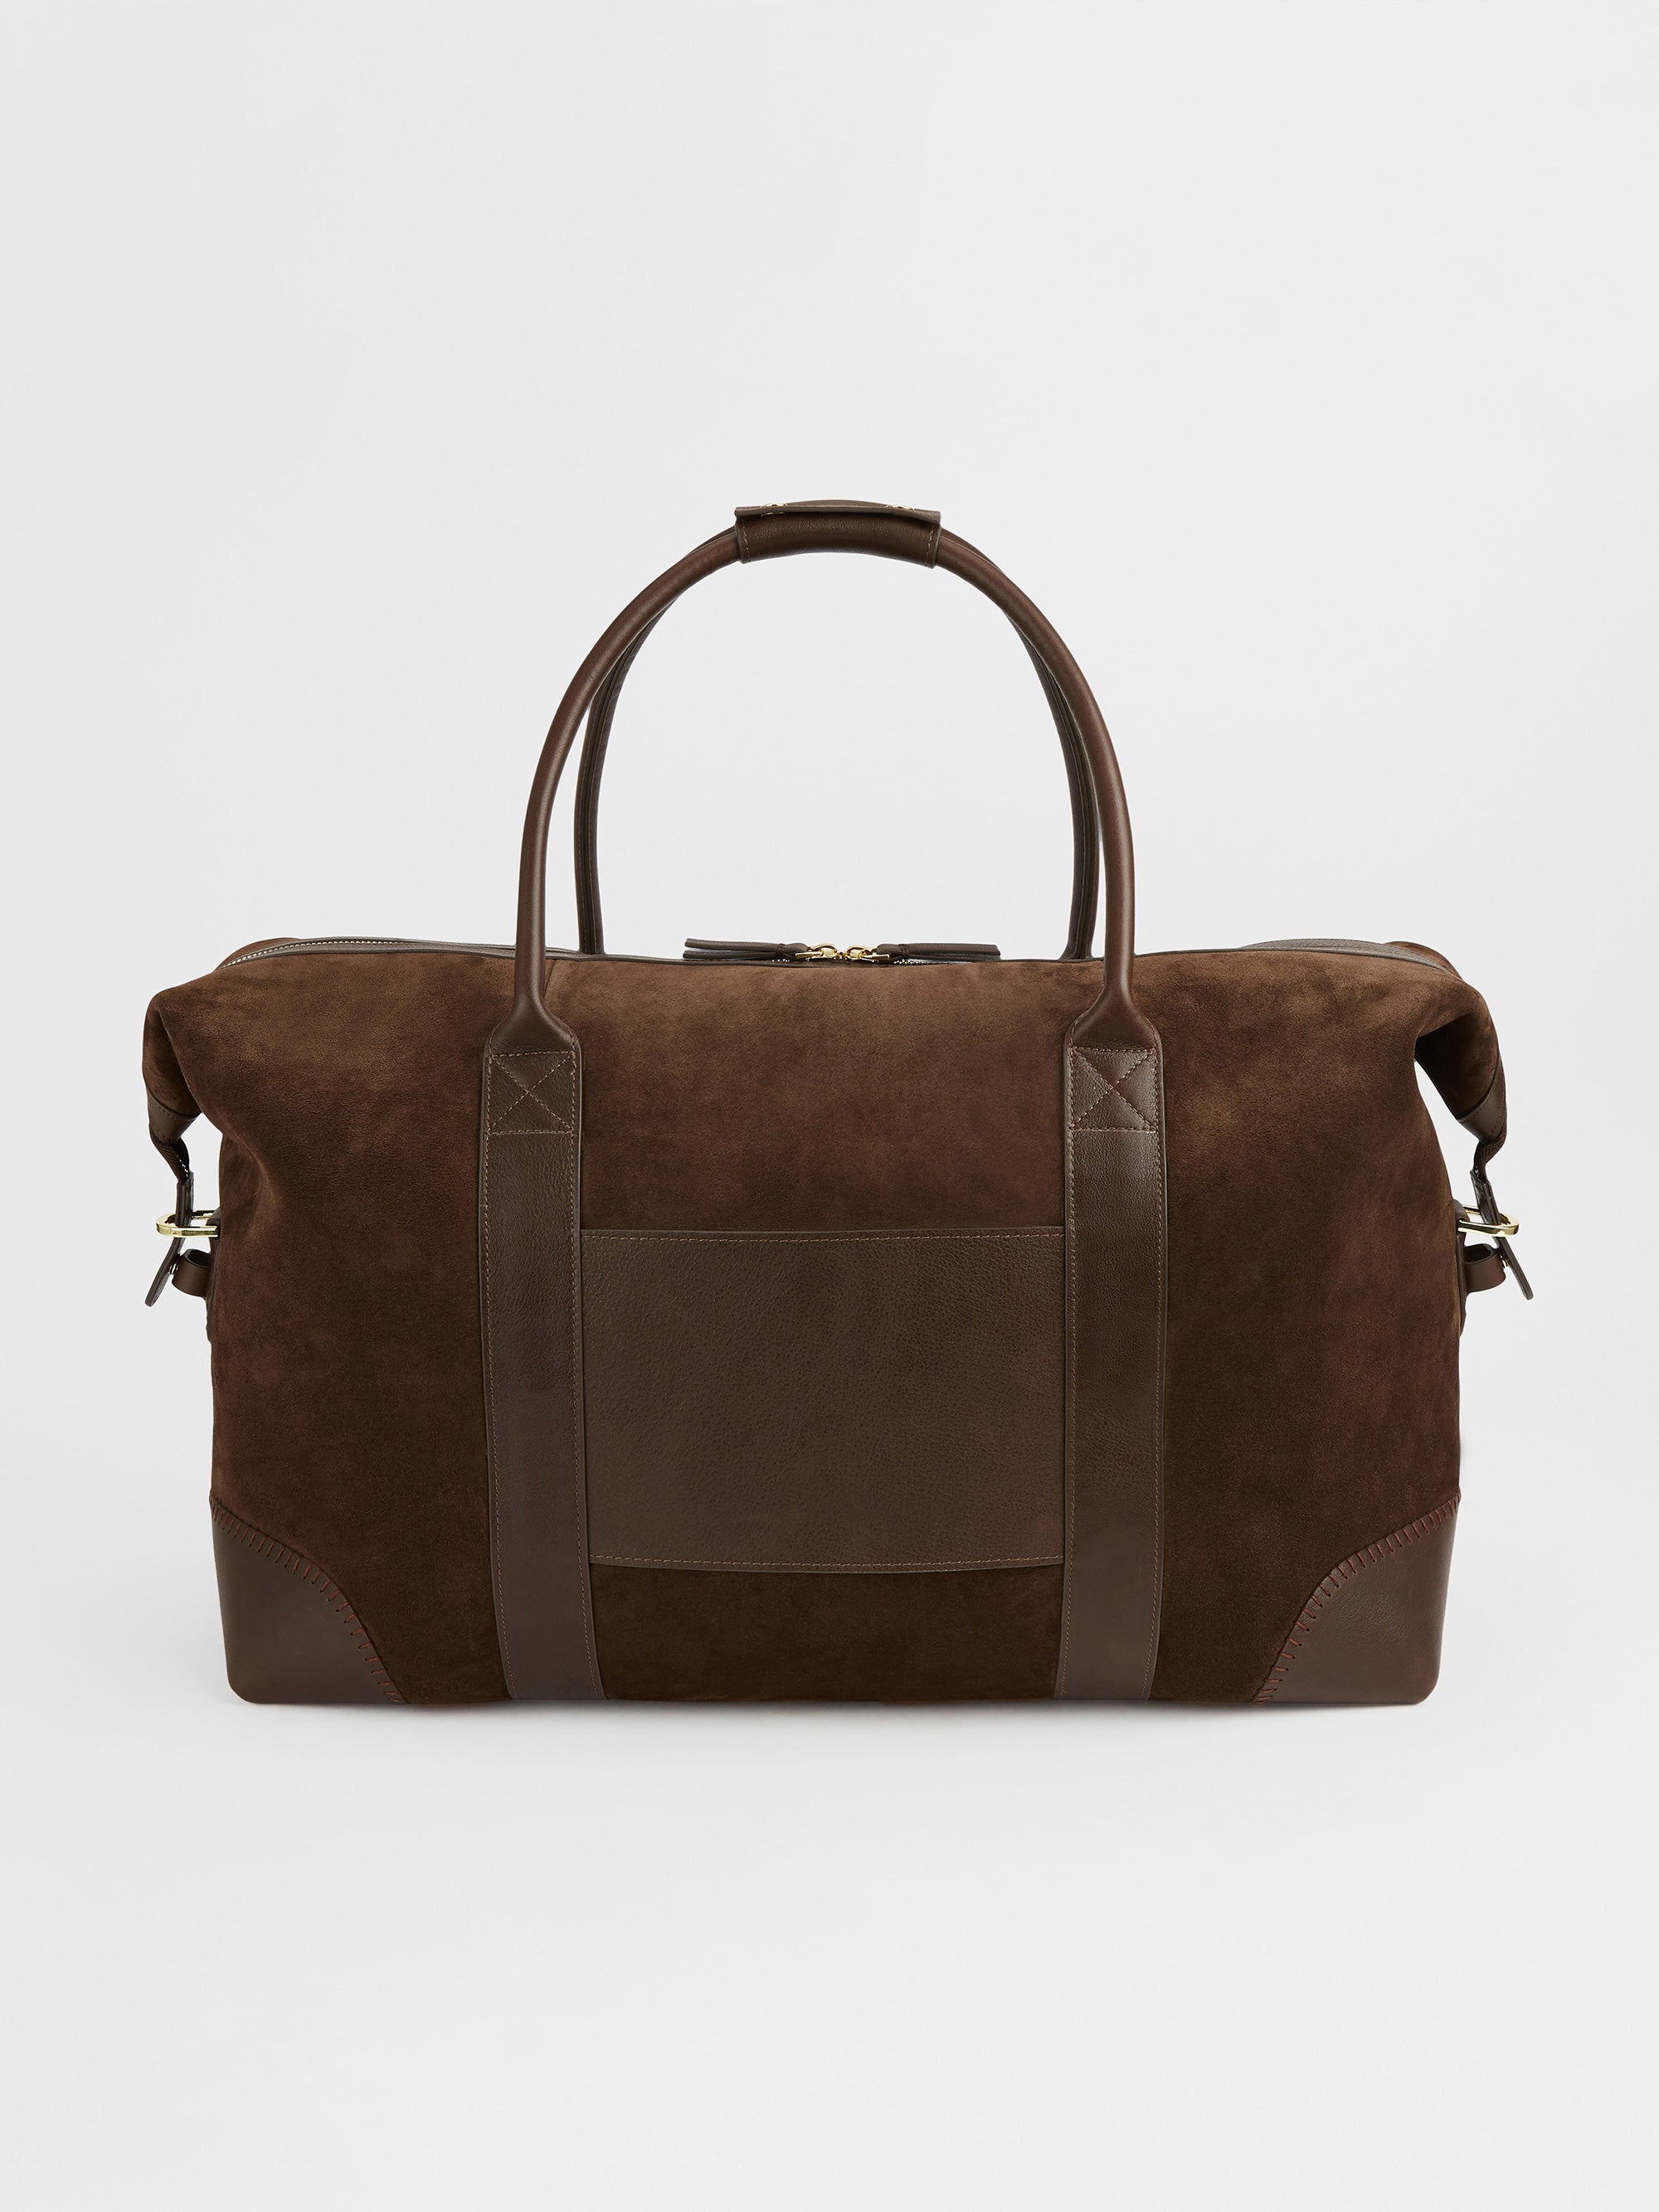 Letter 'C' - The Suede Weekend Bag, Chocolate